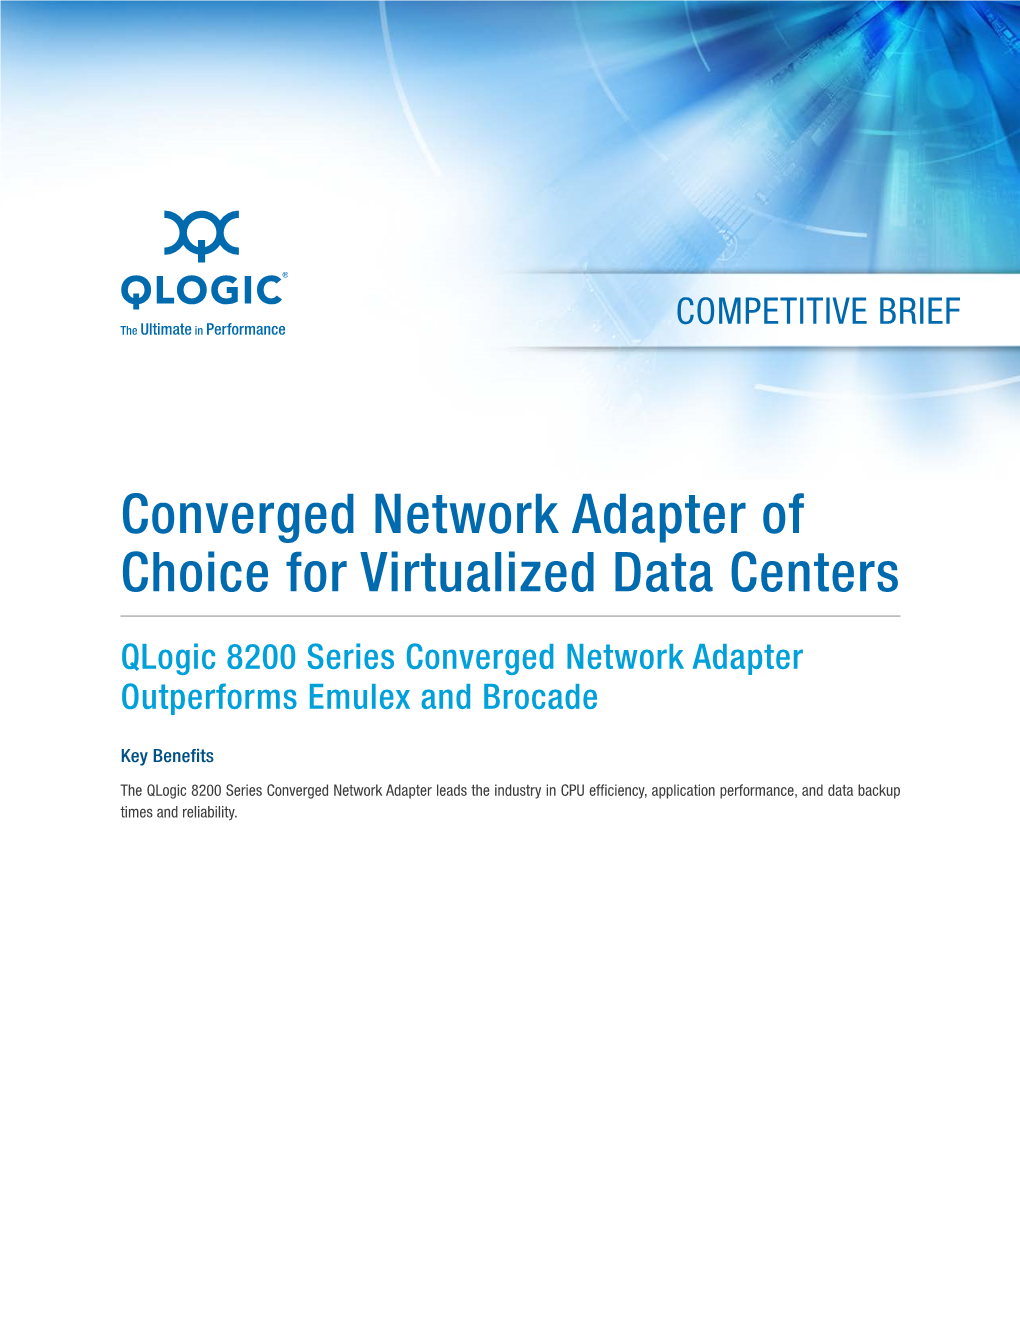 Converged Network Adapter of Choice for Virtualized Data Centers